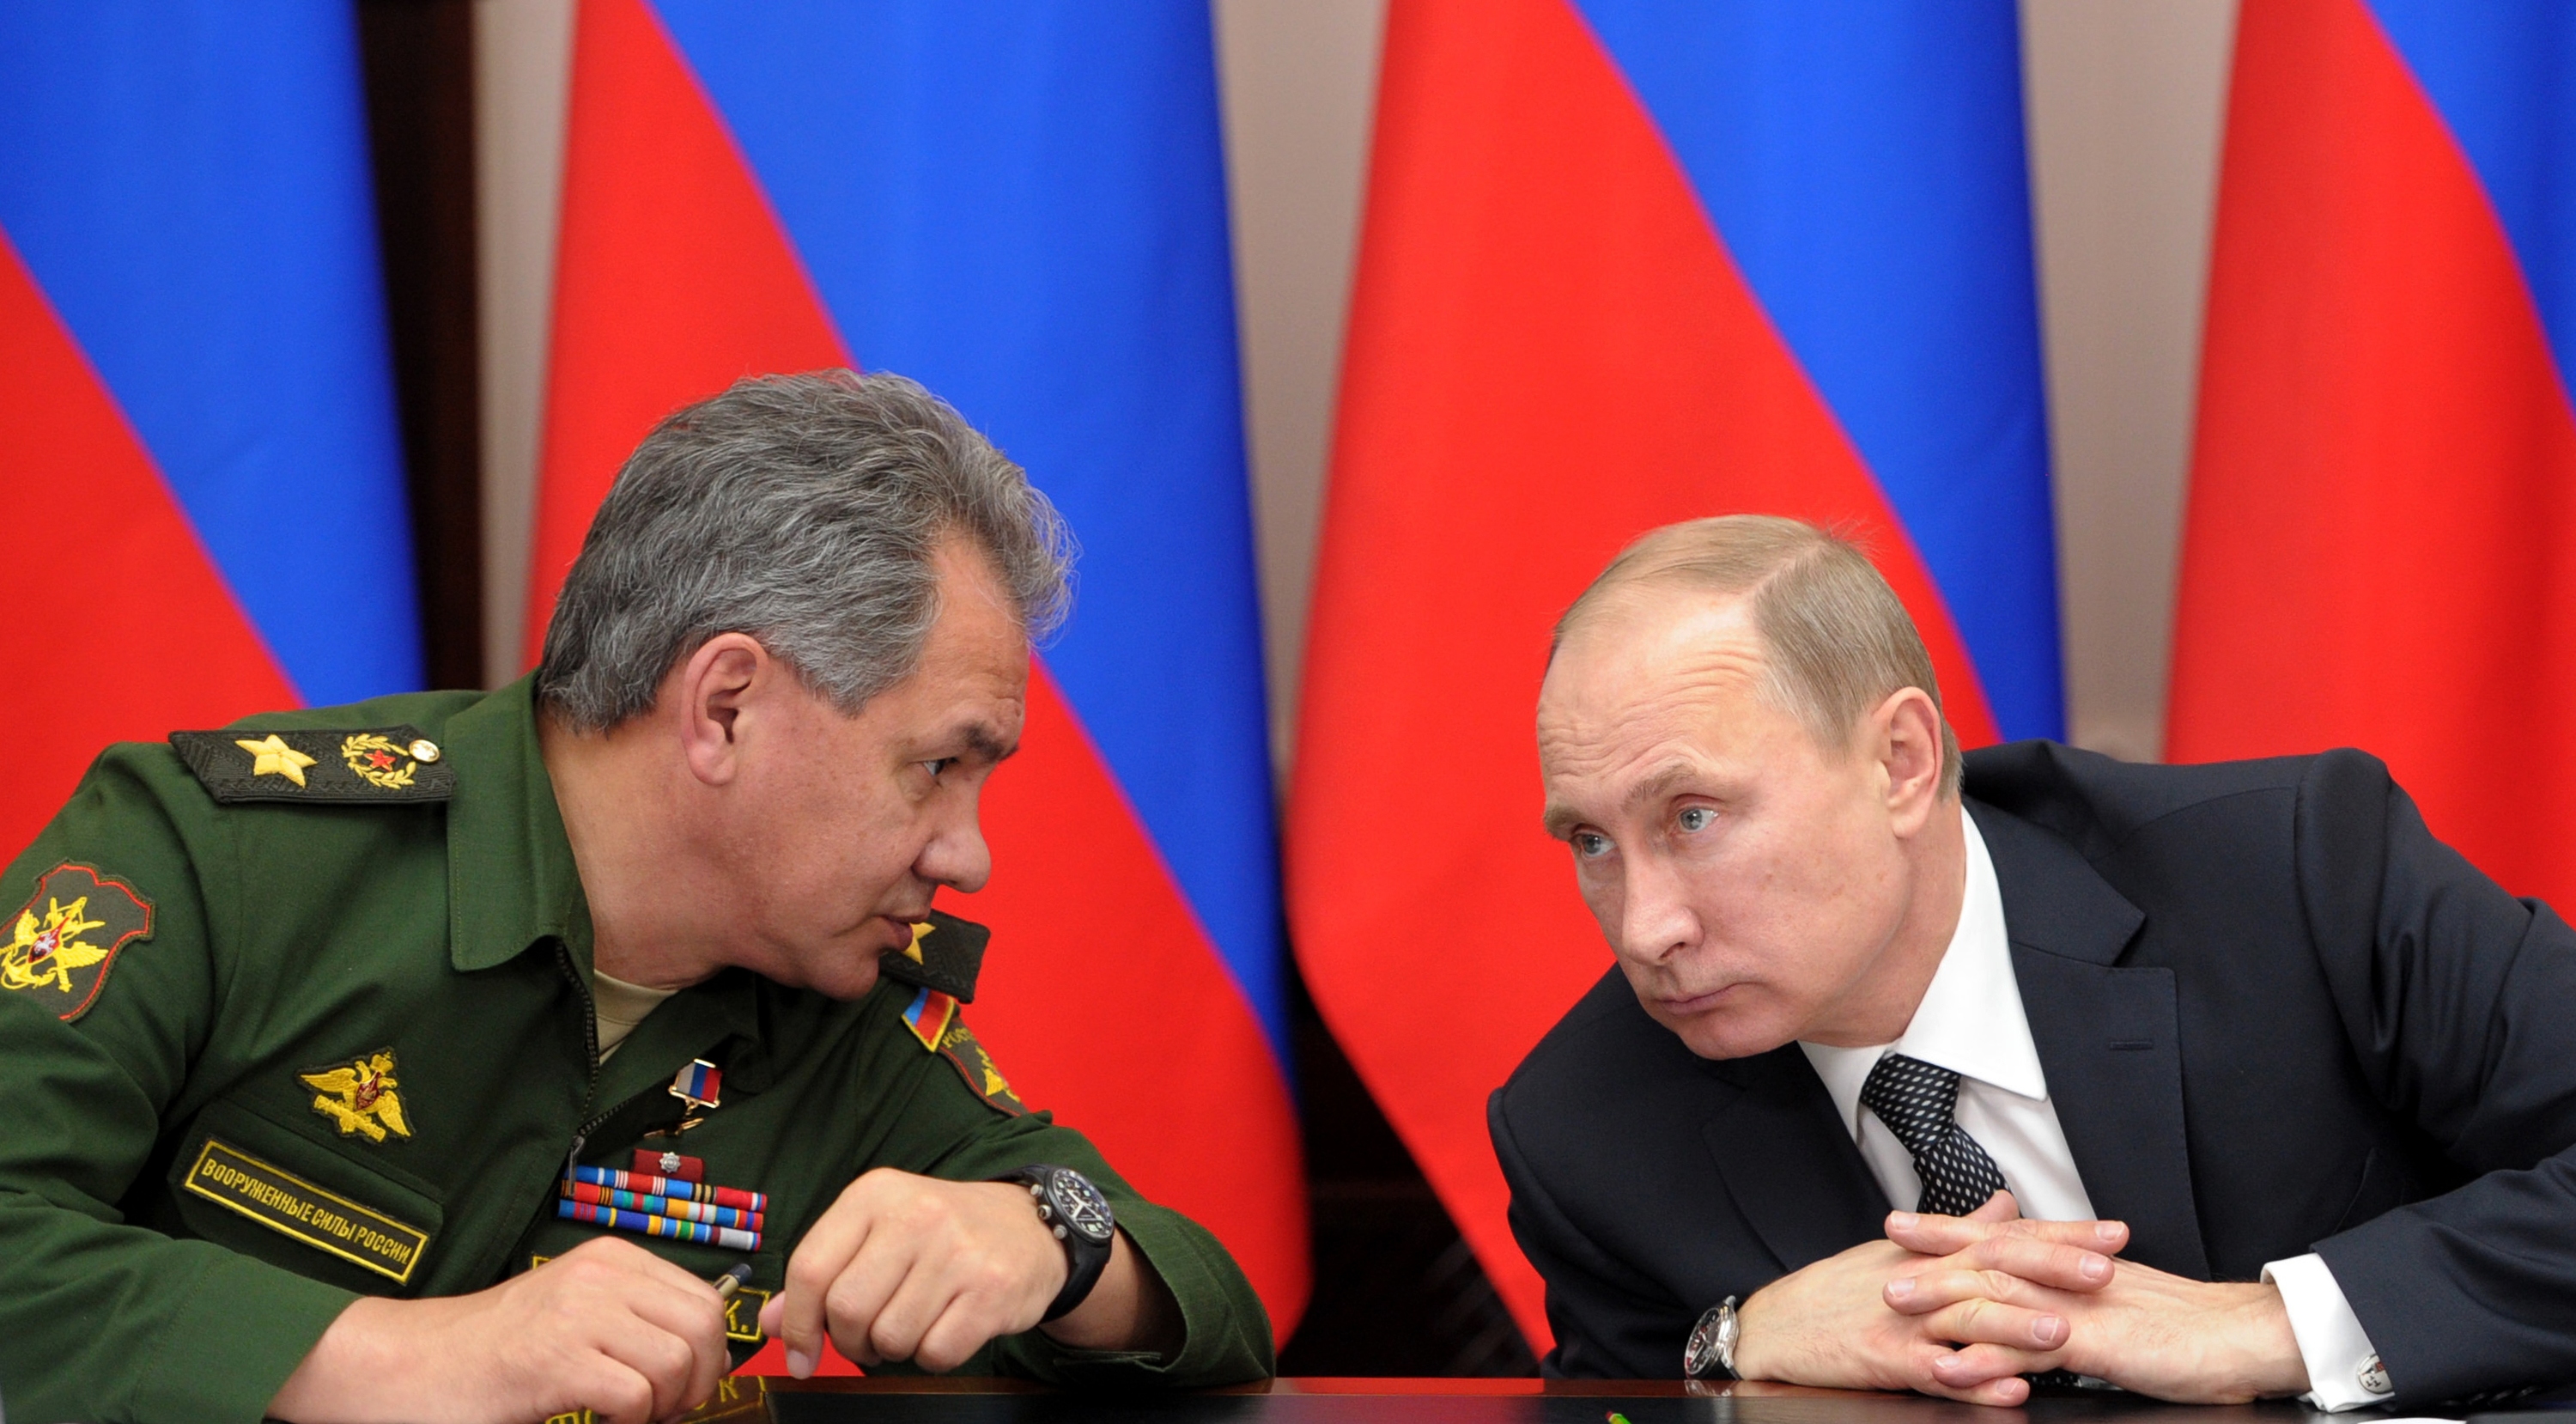 Russian President Vladimir Putin (right) and Defense Minister Sergei Shoigu attend a meeting in Moscow, Russia. (Alexei Nikolsky—AP)